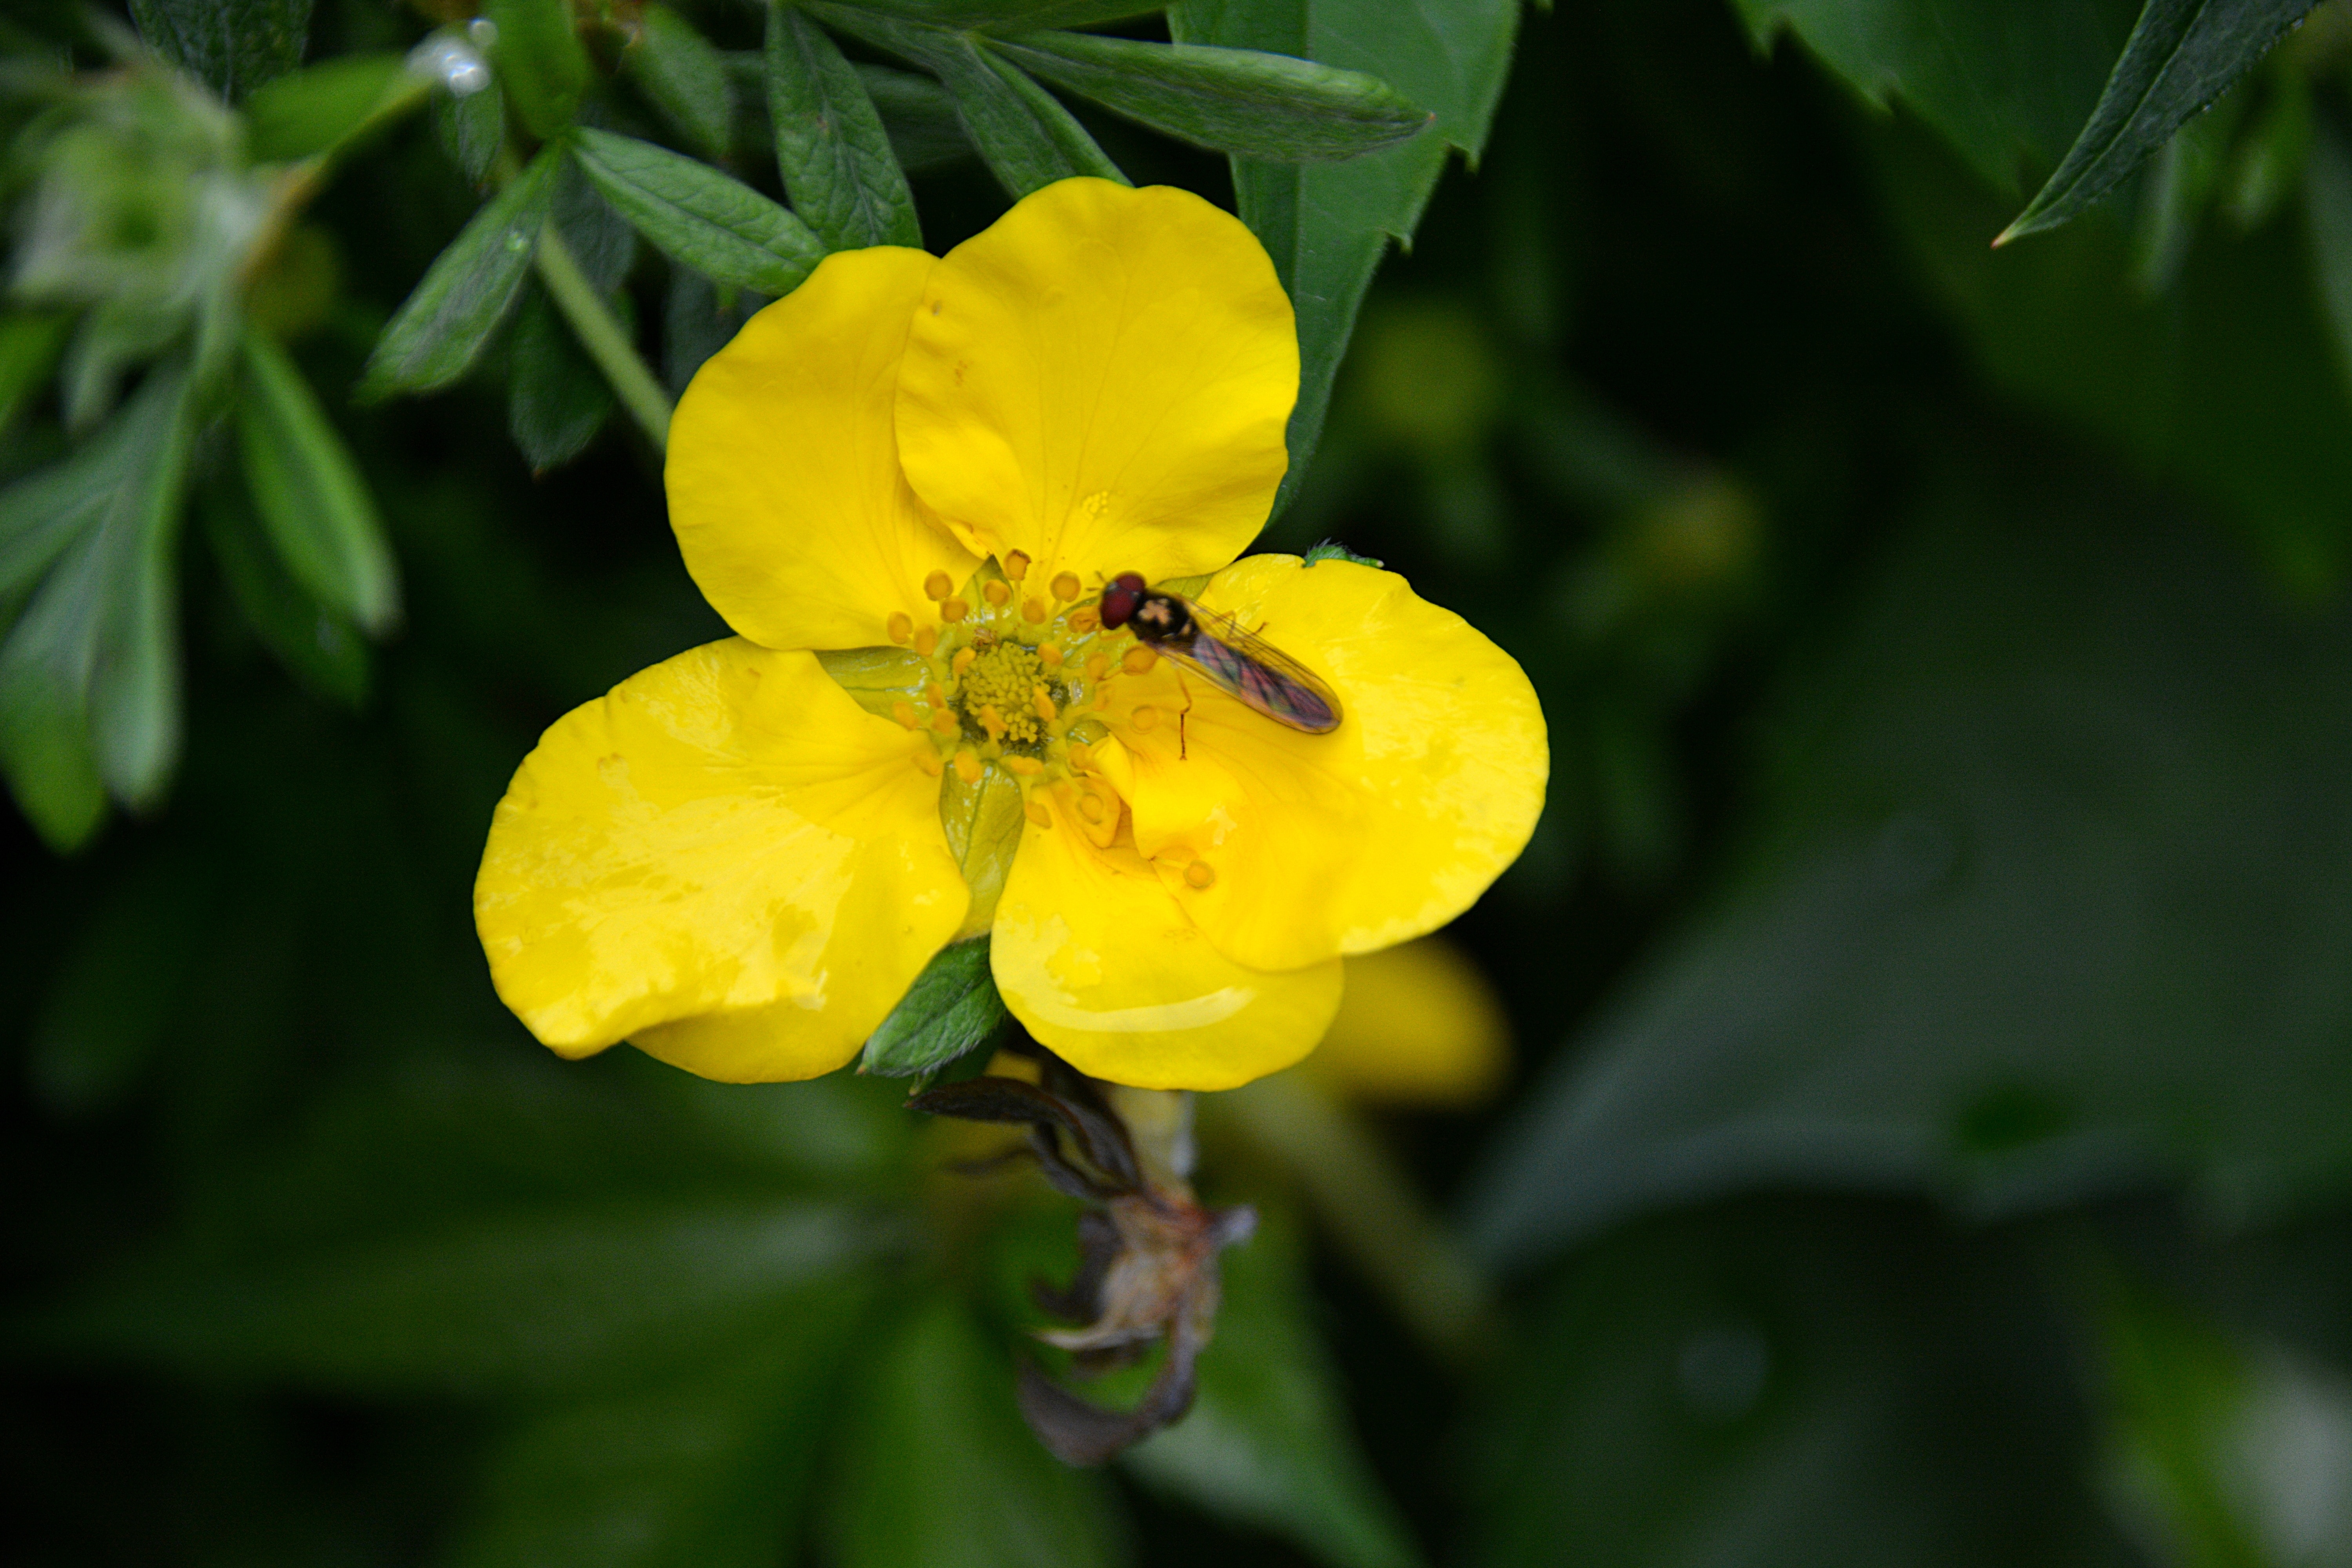 Insect, Flower, Nature, Garden, Plant, yellow, flower